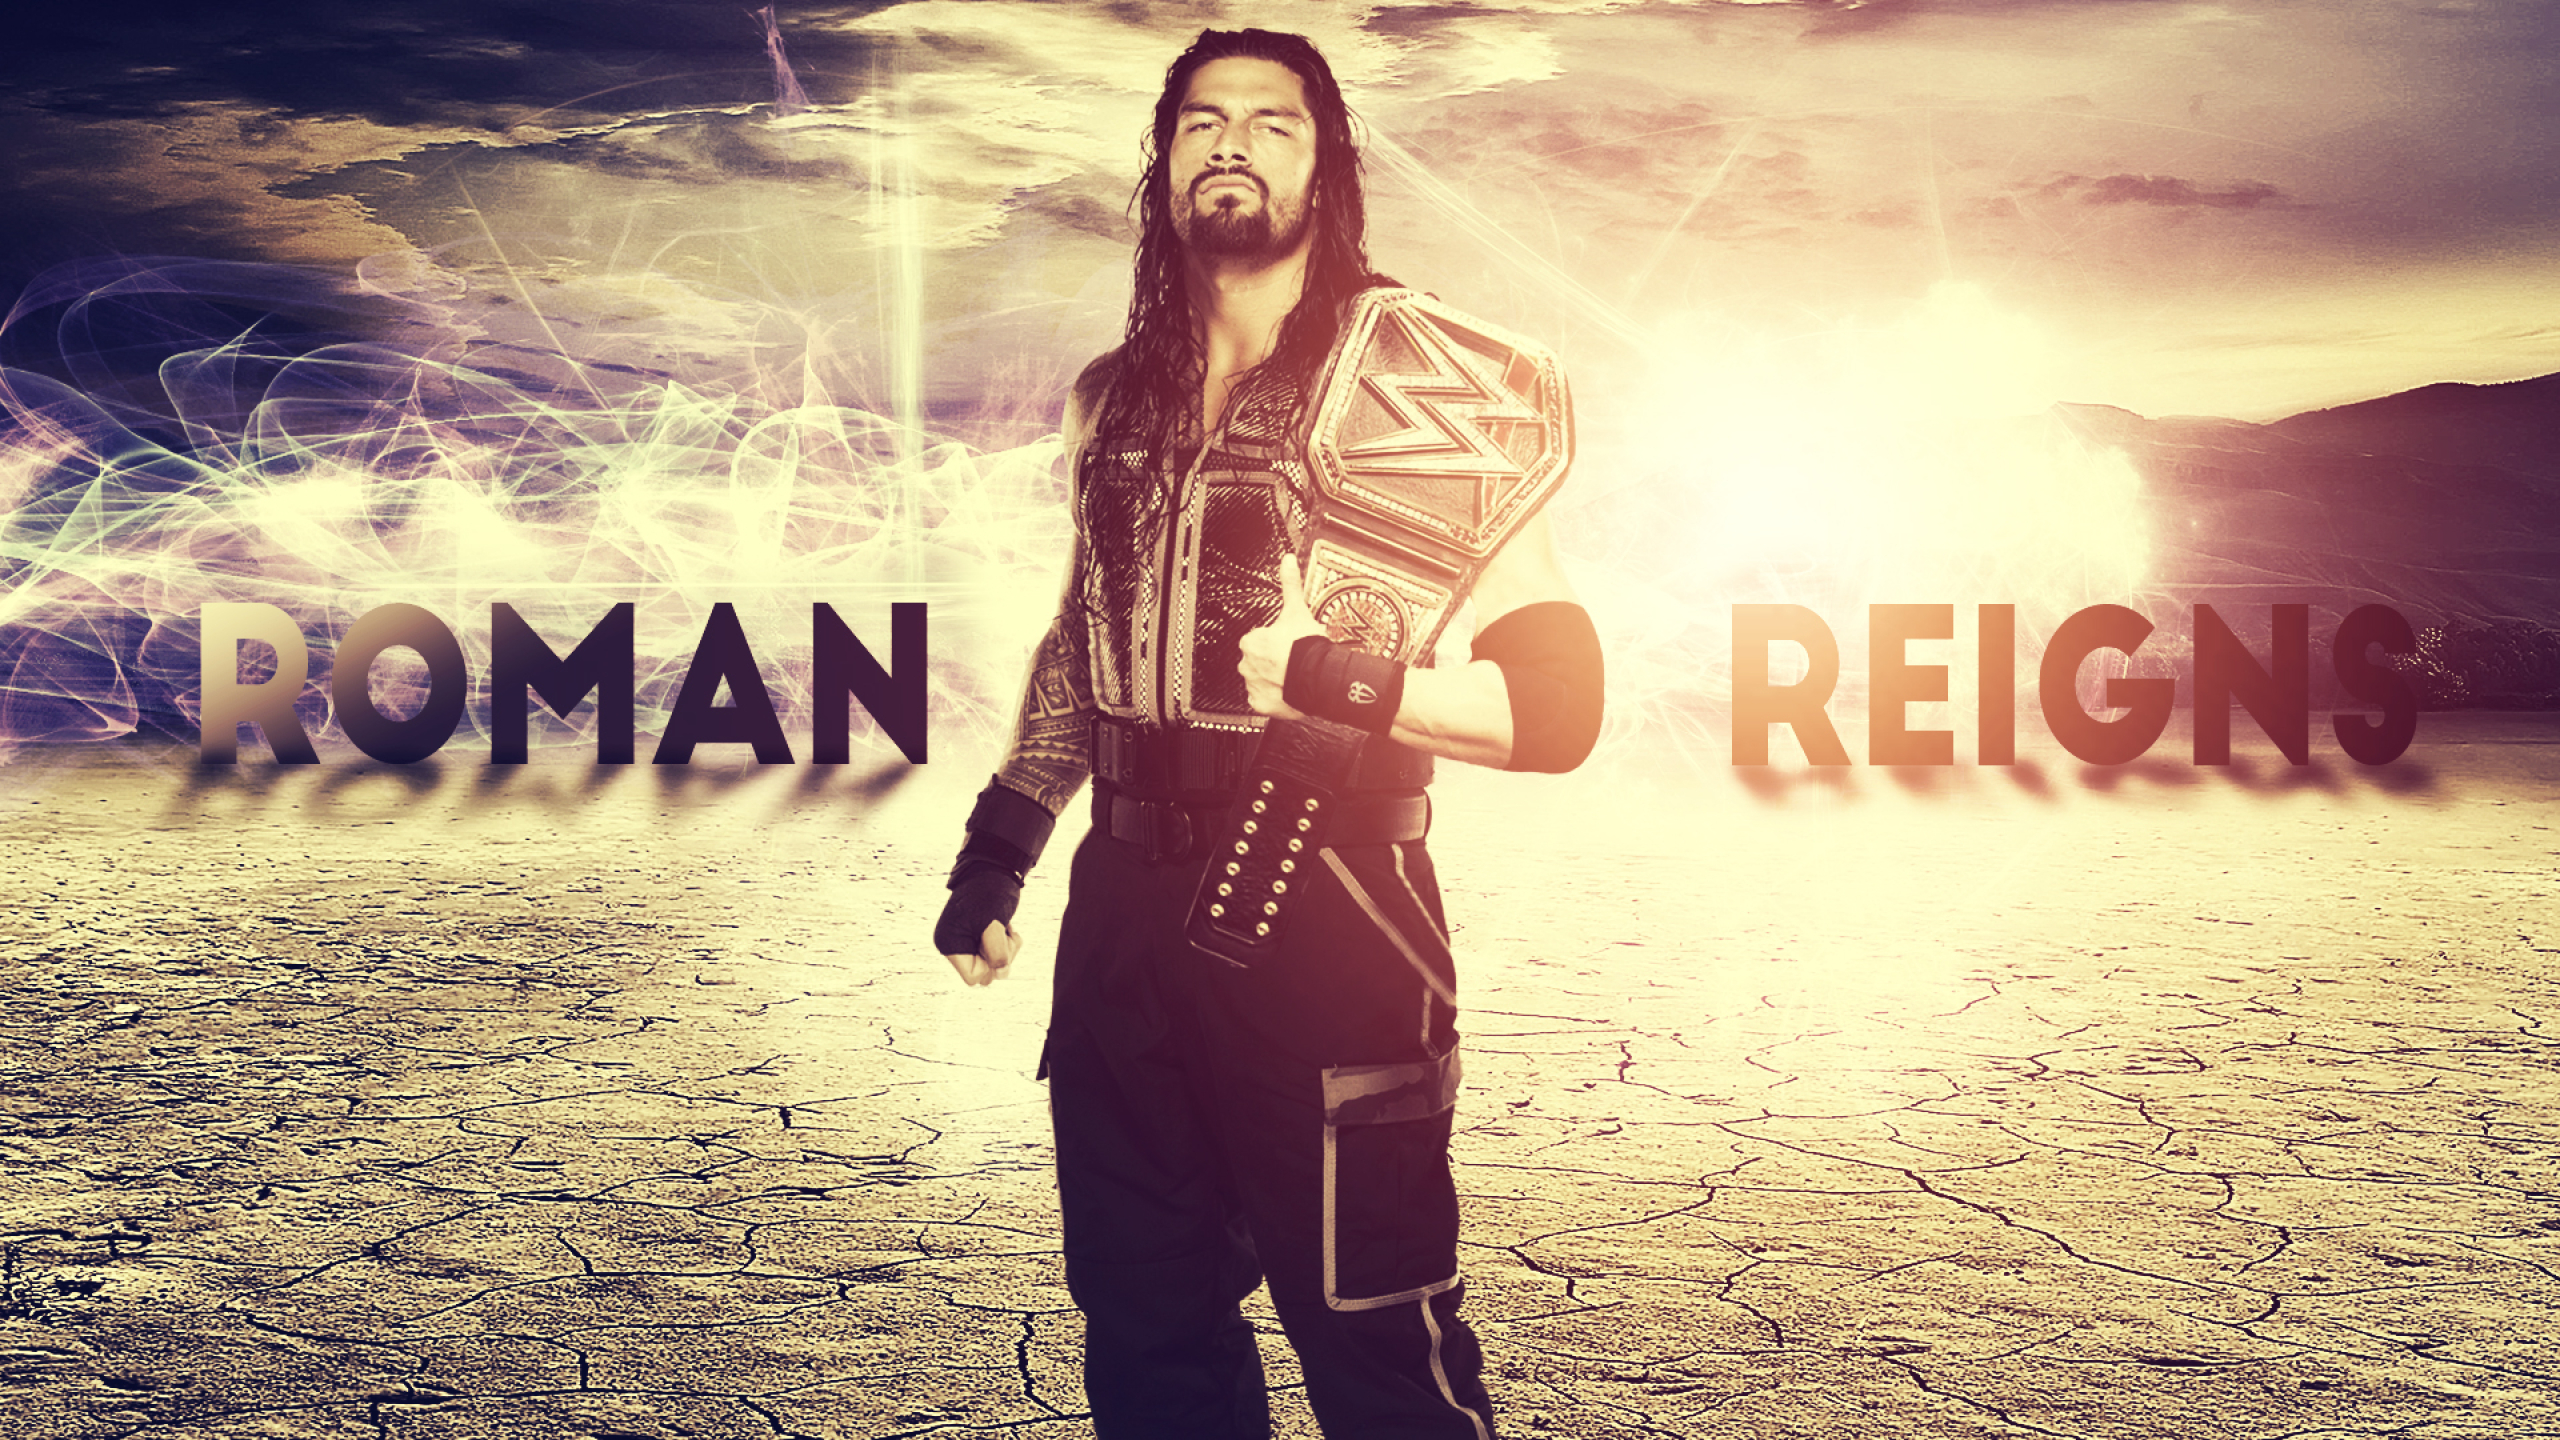 2560x1440 Roman Reigns WWE Champion 1440P Resolution Wallpaper, HD  Celebrities 4K Wallpapers, Images, Photos and Background - Wallpapers Den